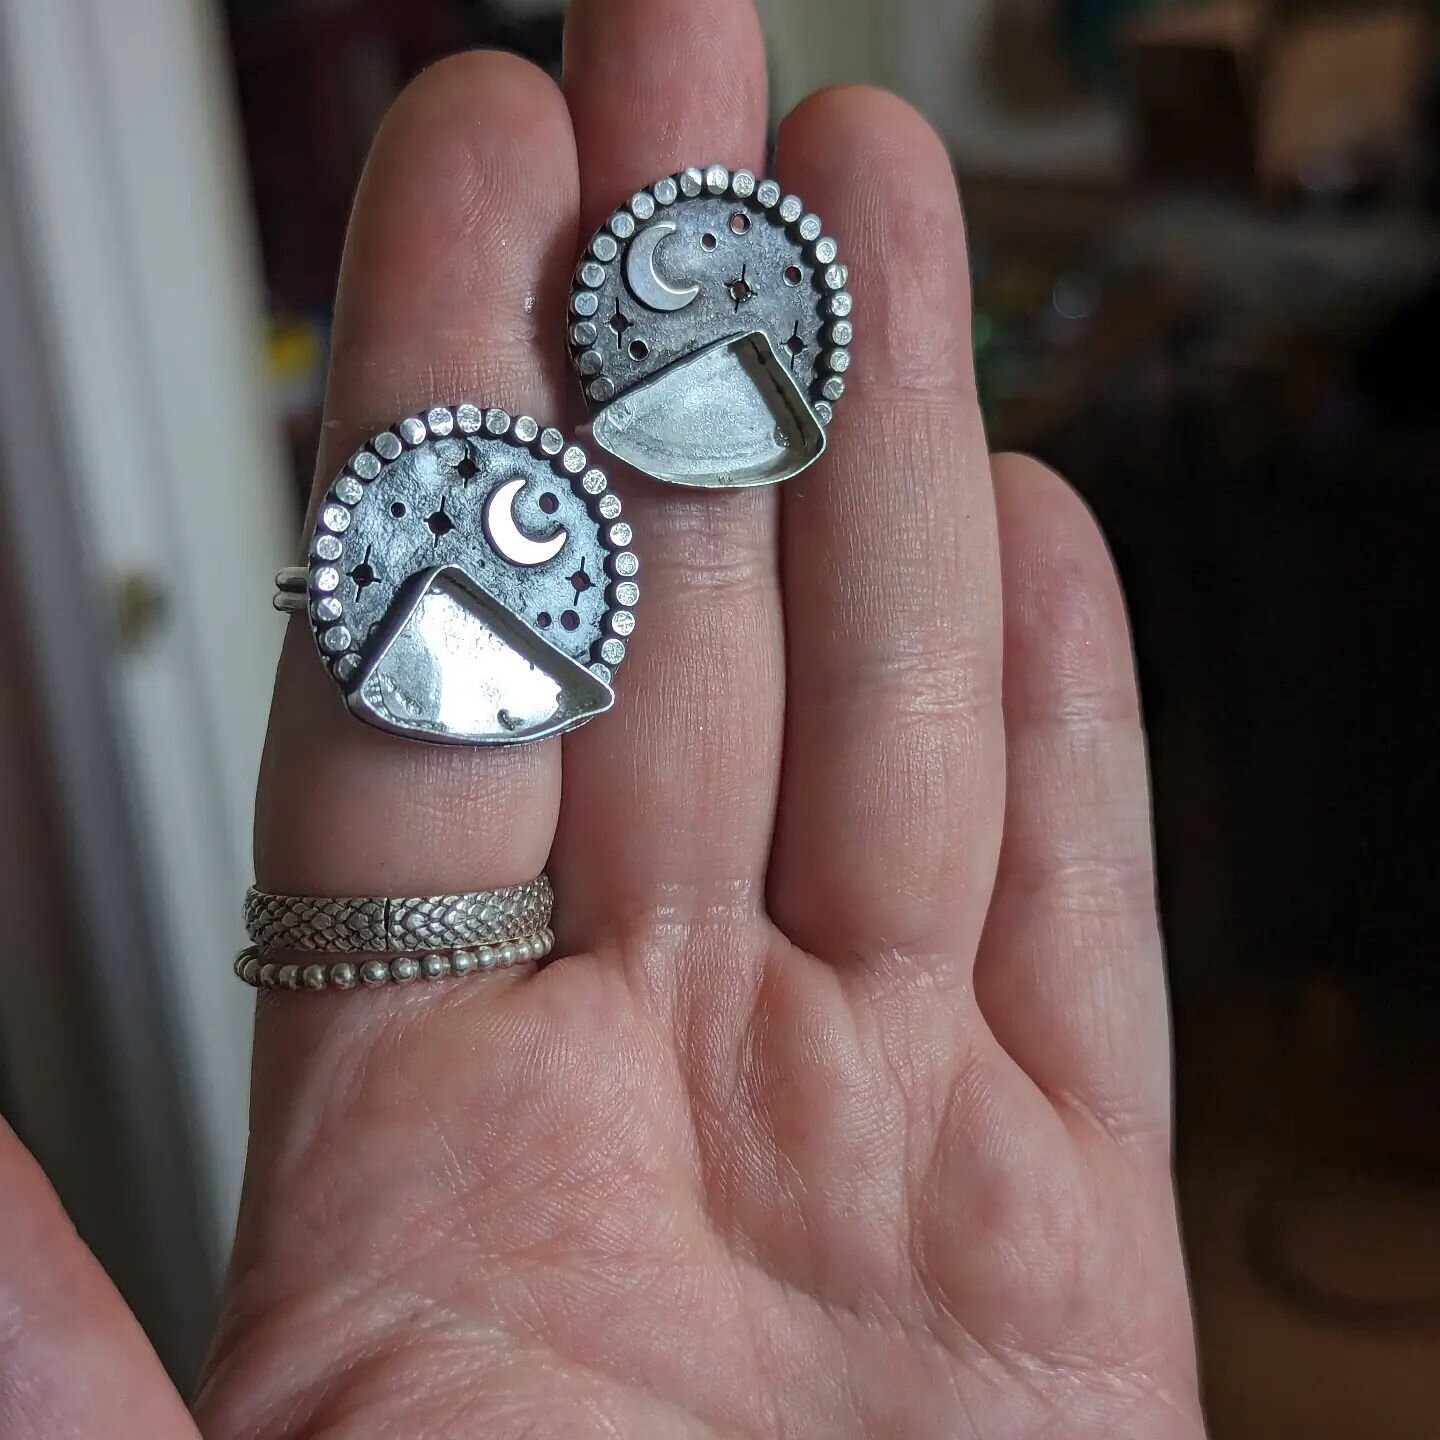 The last time I made a Mountain Moon Ring, it went to a new home right away, and I barely had the chance to take real pictures of it! I am reviving the design and creating several iterations, with more stone flavors and sizes. Can't wait to show off 